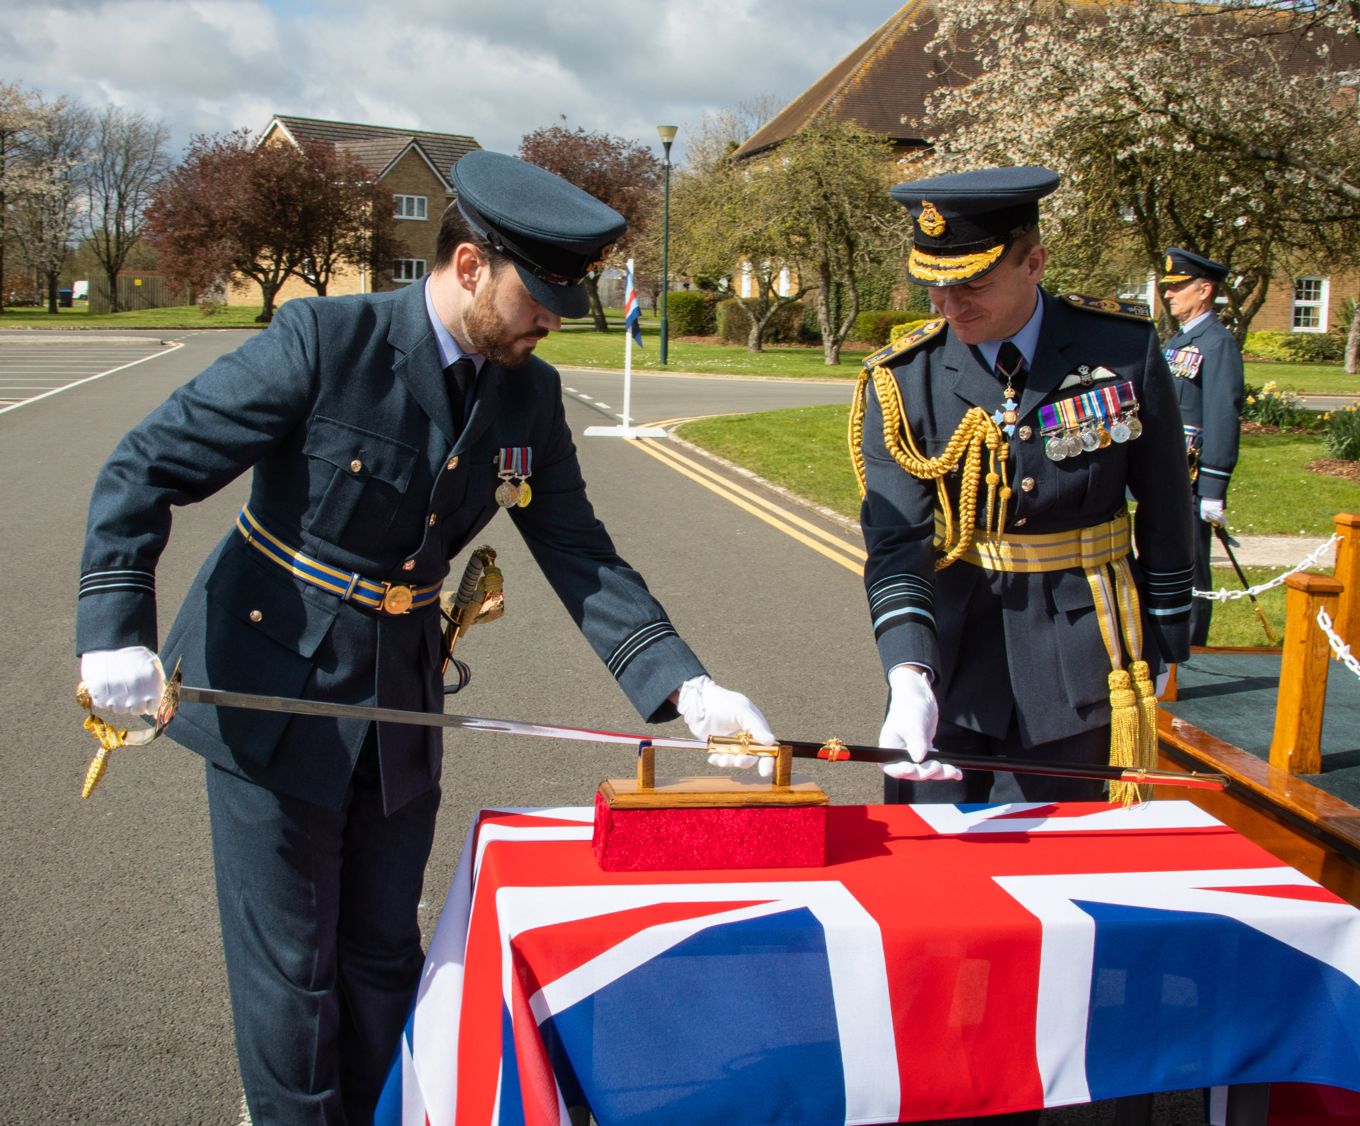 Flight Lieutenant Ben Burton, Parade Commander, along with the Chief of the Air Staff, Air Chief Marshal Sir Mike Wigston KCB CBE ADC unsheathes the Firmin Sword of Peace